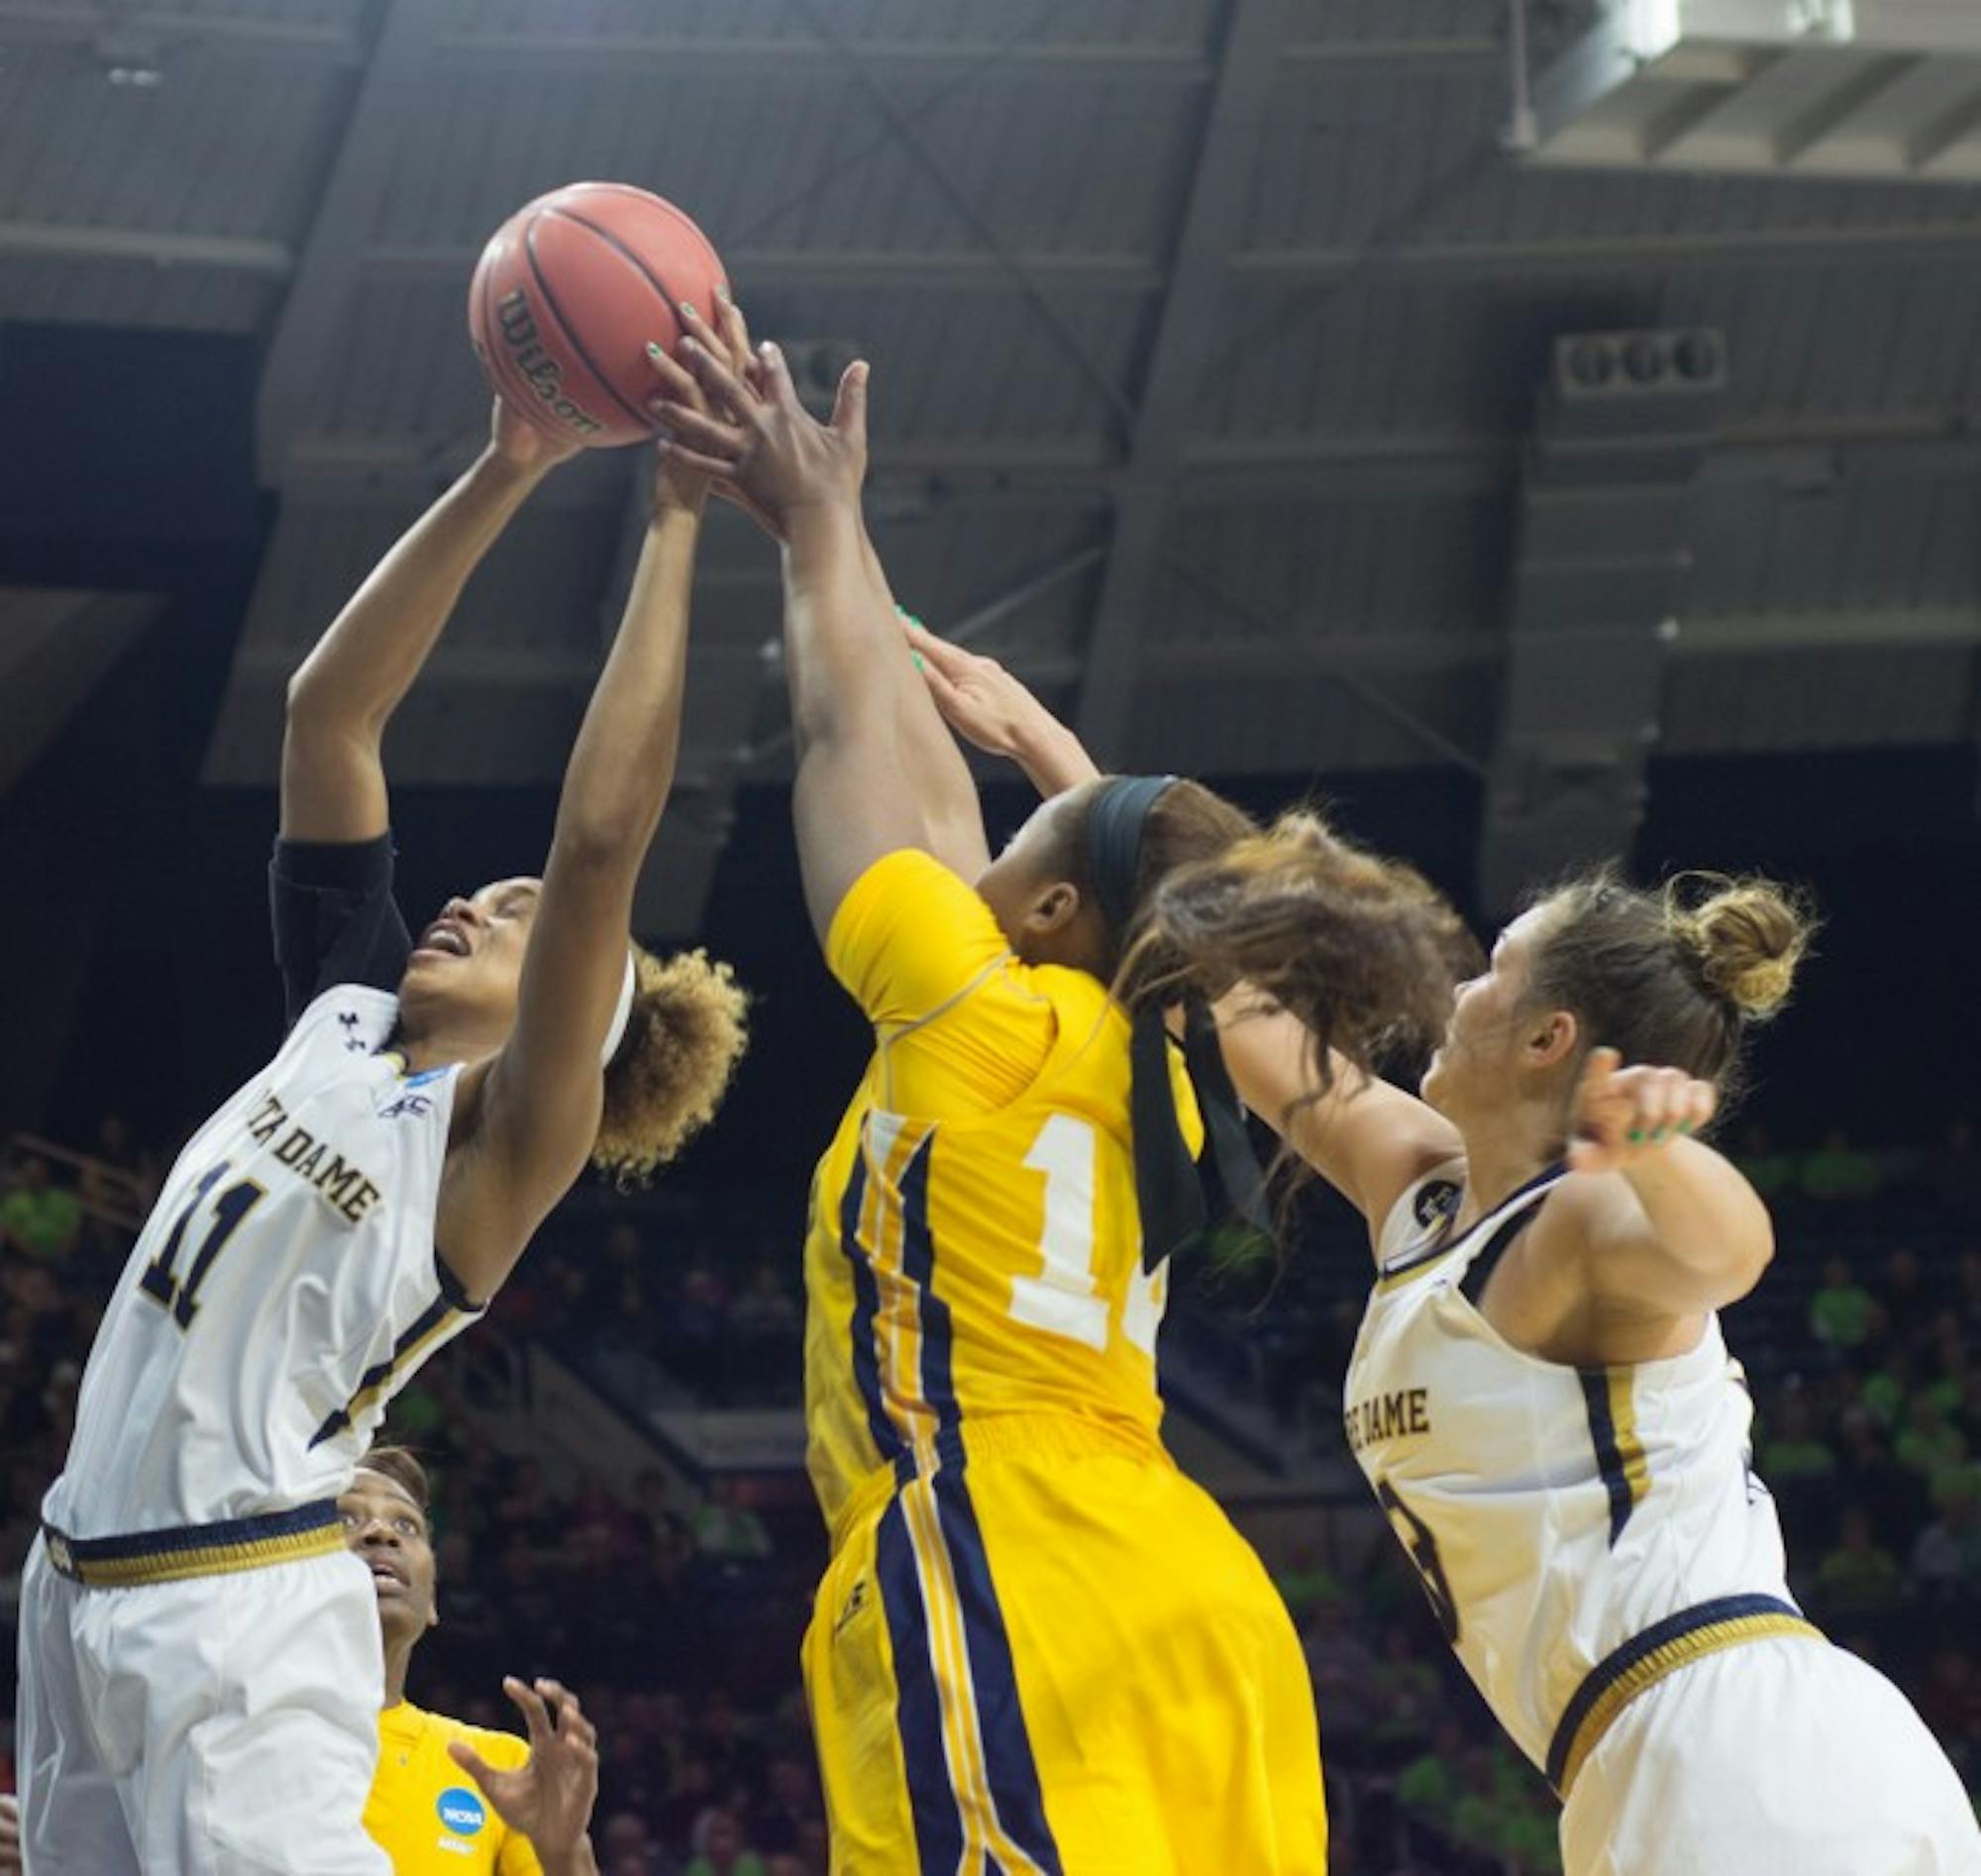 Irish sophomore forward Brianna Turner snags a rebound away from a North Carolina A&T player while Irish freshman guard Marina Mabrey looks on during Notre Dame's 95-61 victory Saturday at Purcell Pavilion in the first round of the NCAA tournament.